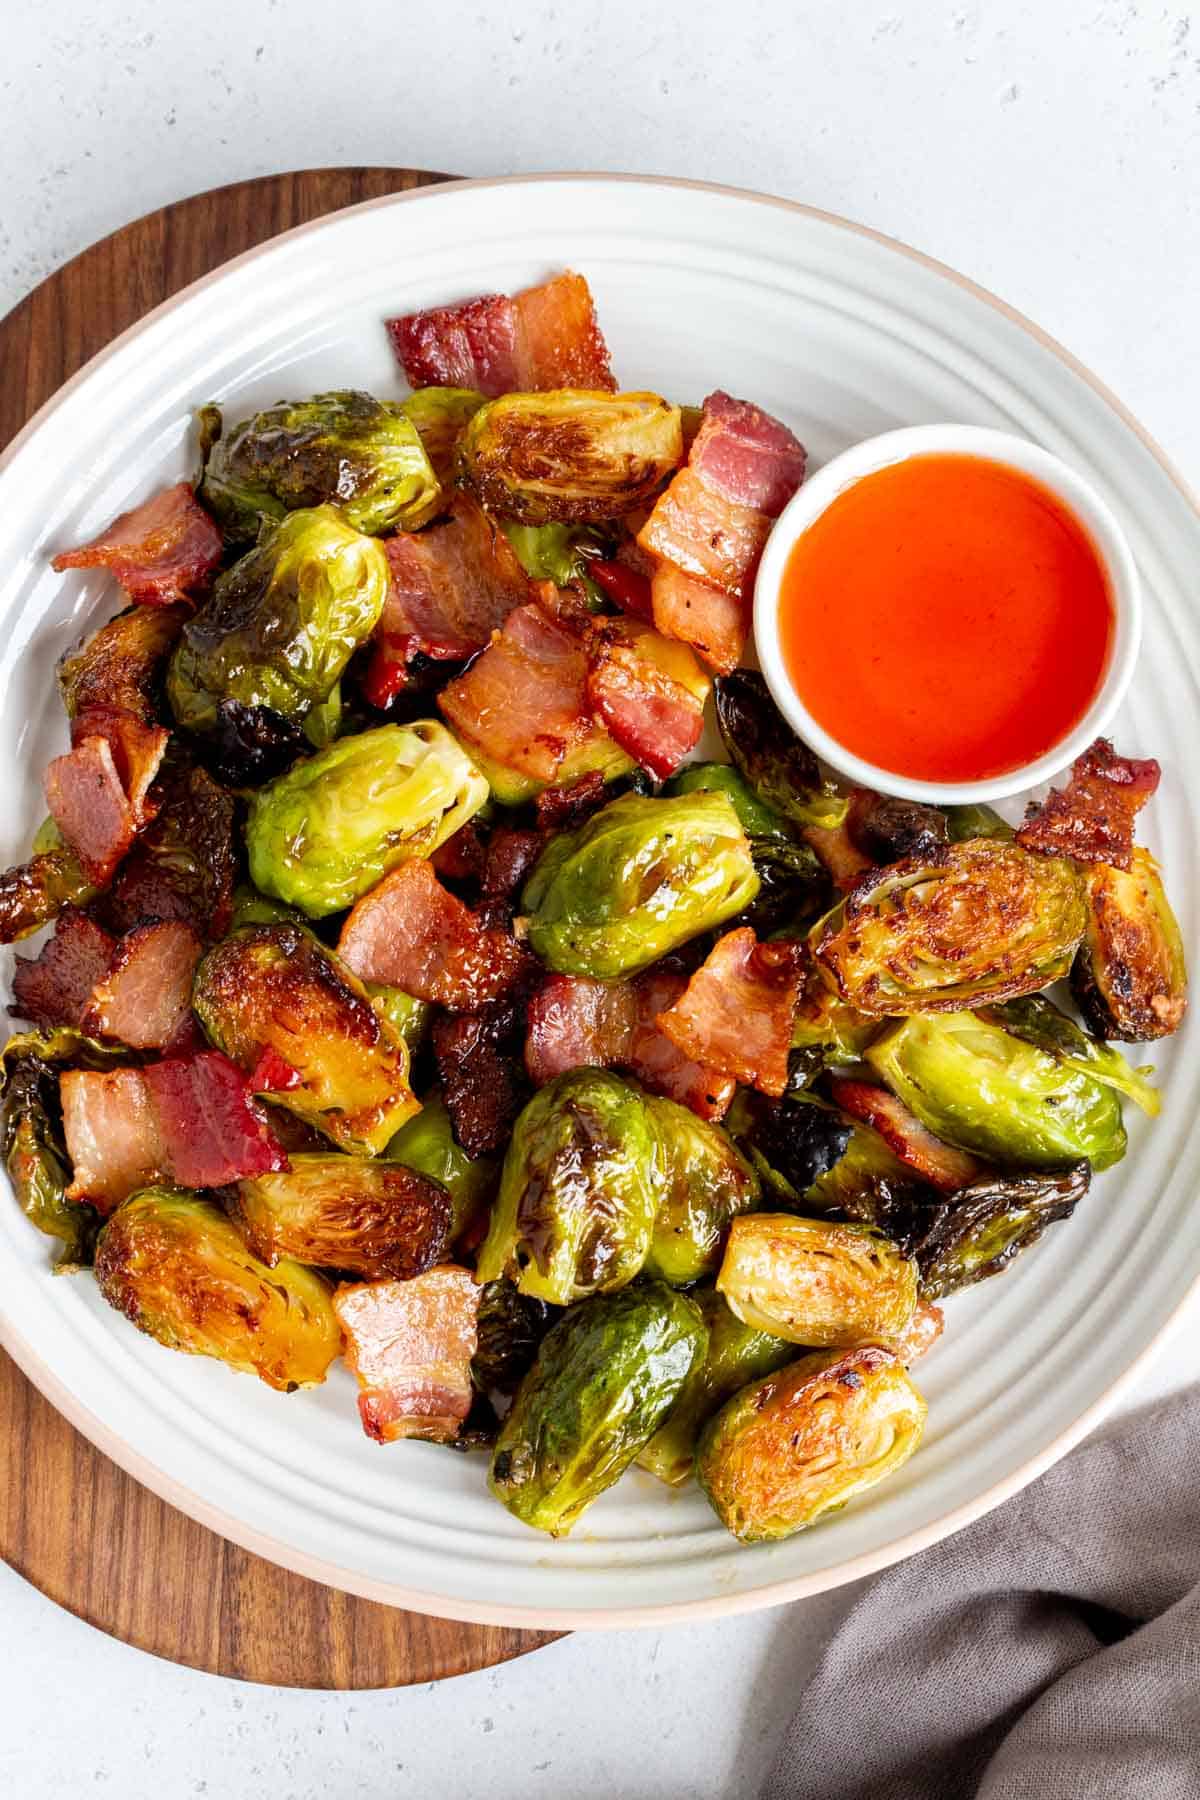 Overhead view of a plate of roasted brussels sprouts with bacon and hot honey with a bowl of hot honey on the side.